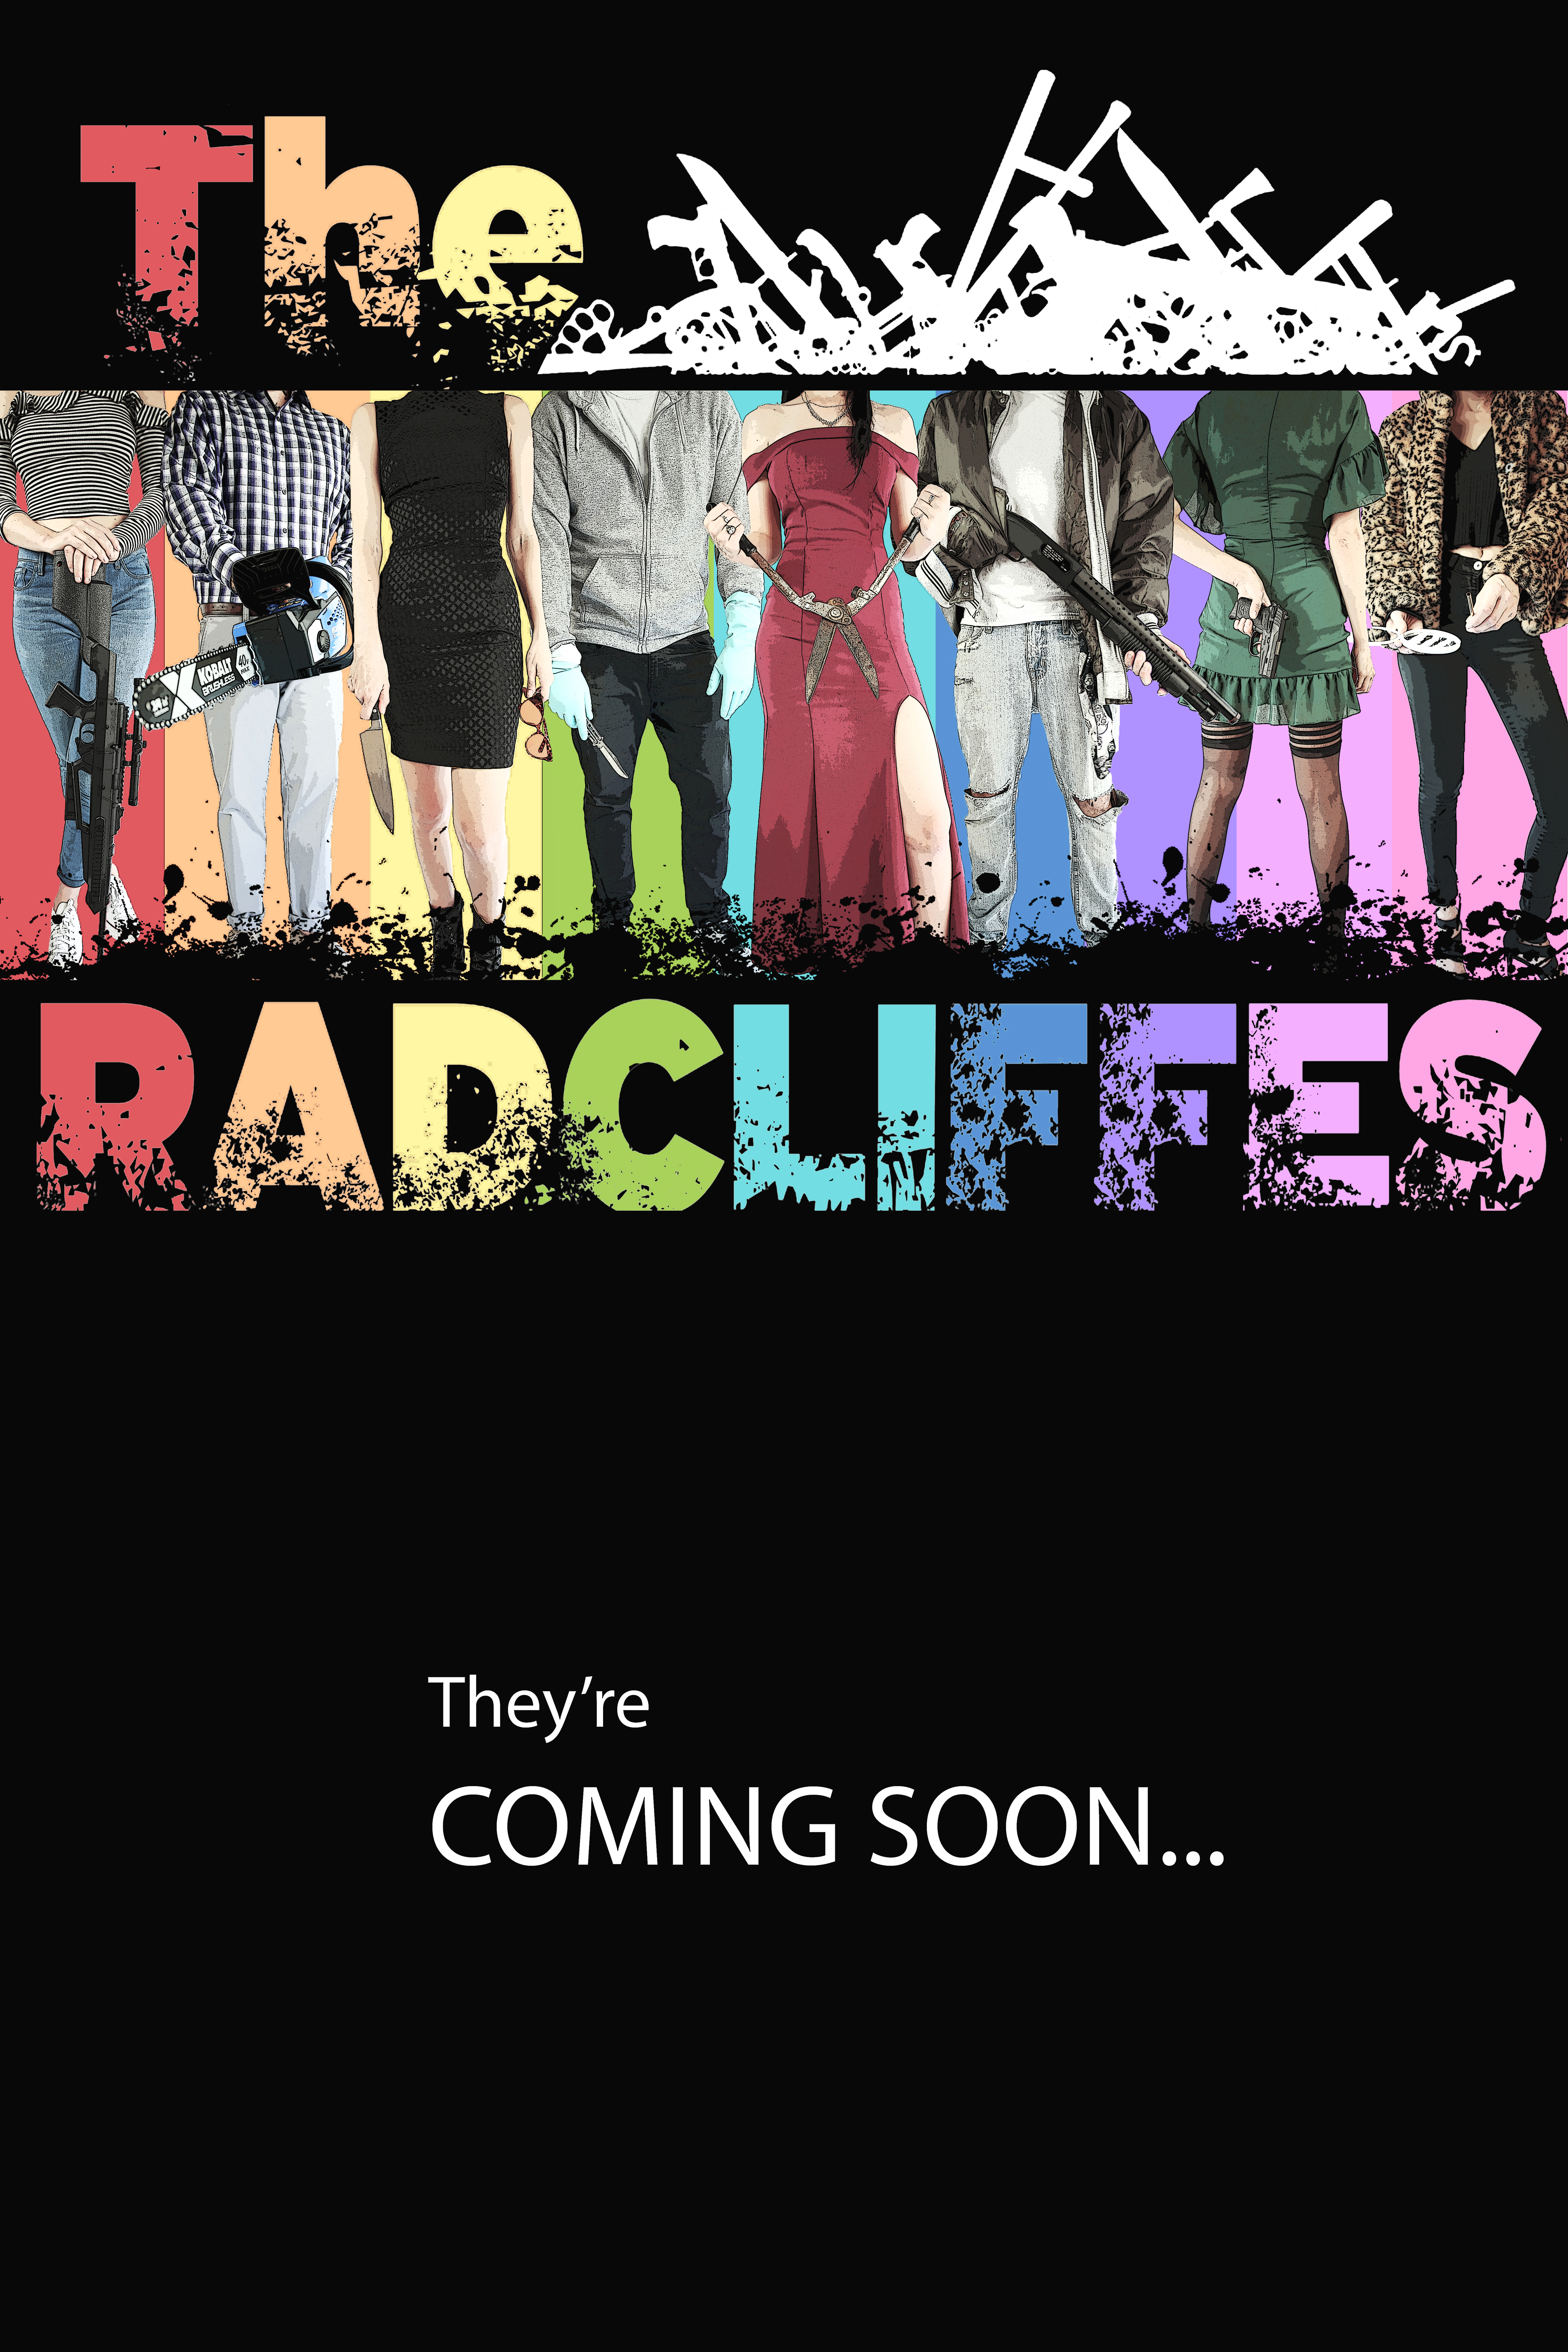 The Radcliffes (2021)